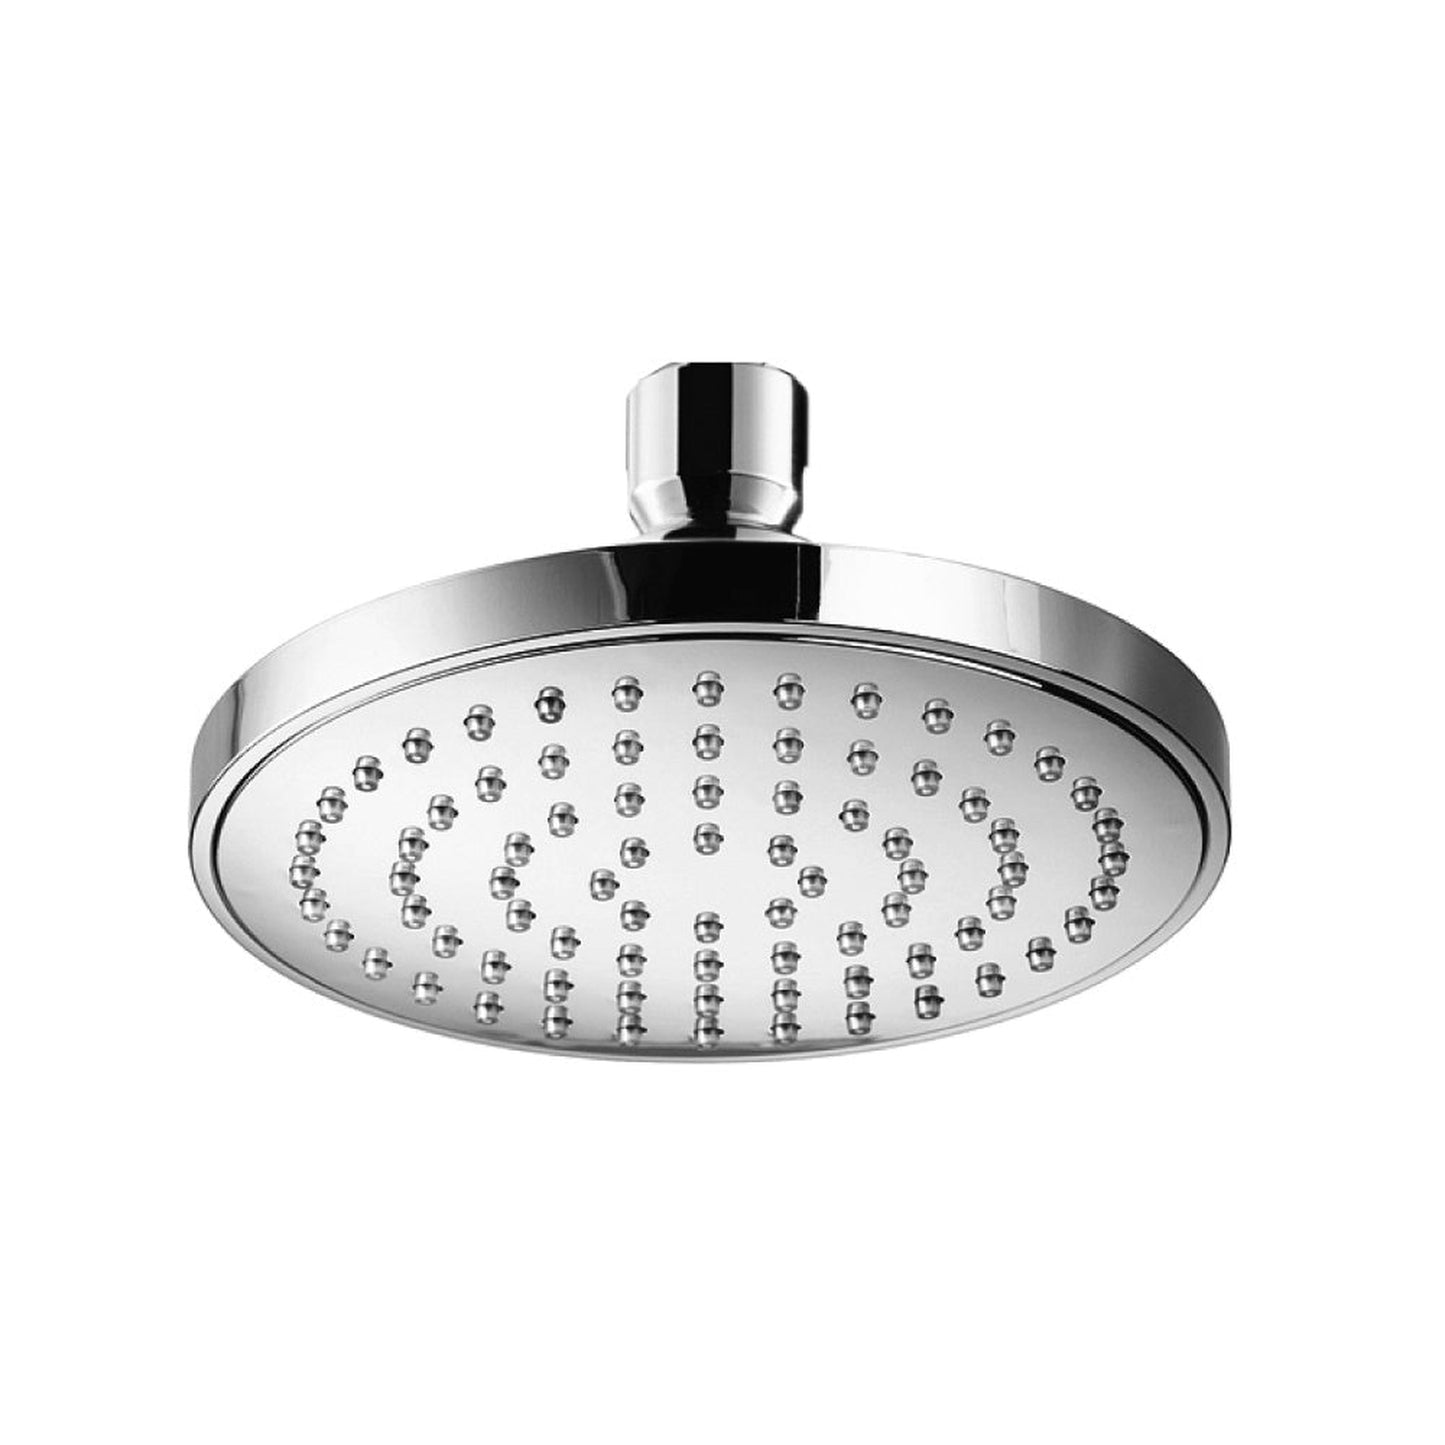 Isenberg Universal Fixtures Single Function ABS Showerhead in Chrome